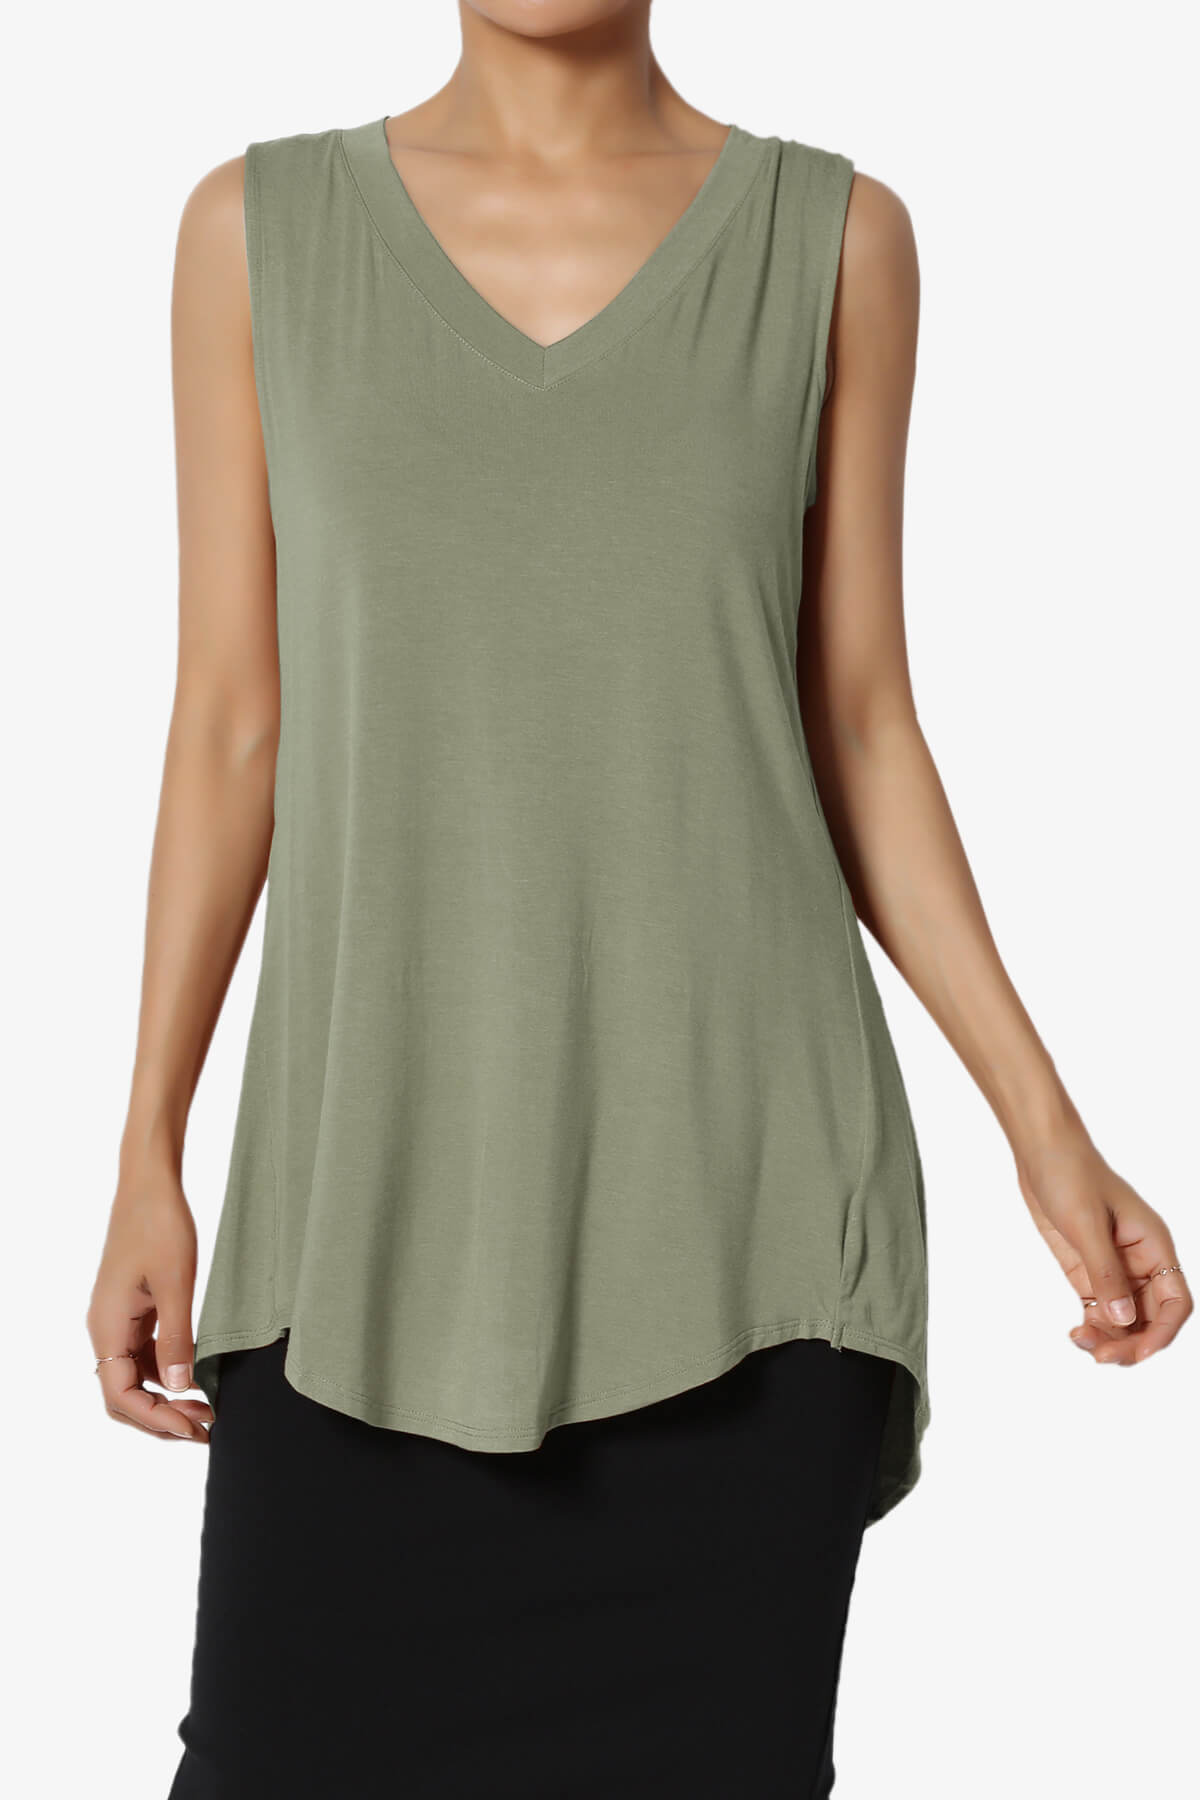 Load image into Gallery viewer, Myles Sleeveless V-Neck Luxe Jersey Top DUSTY OLIVE_1
